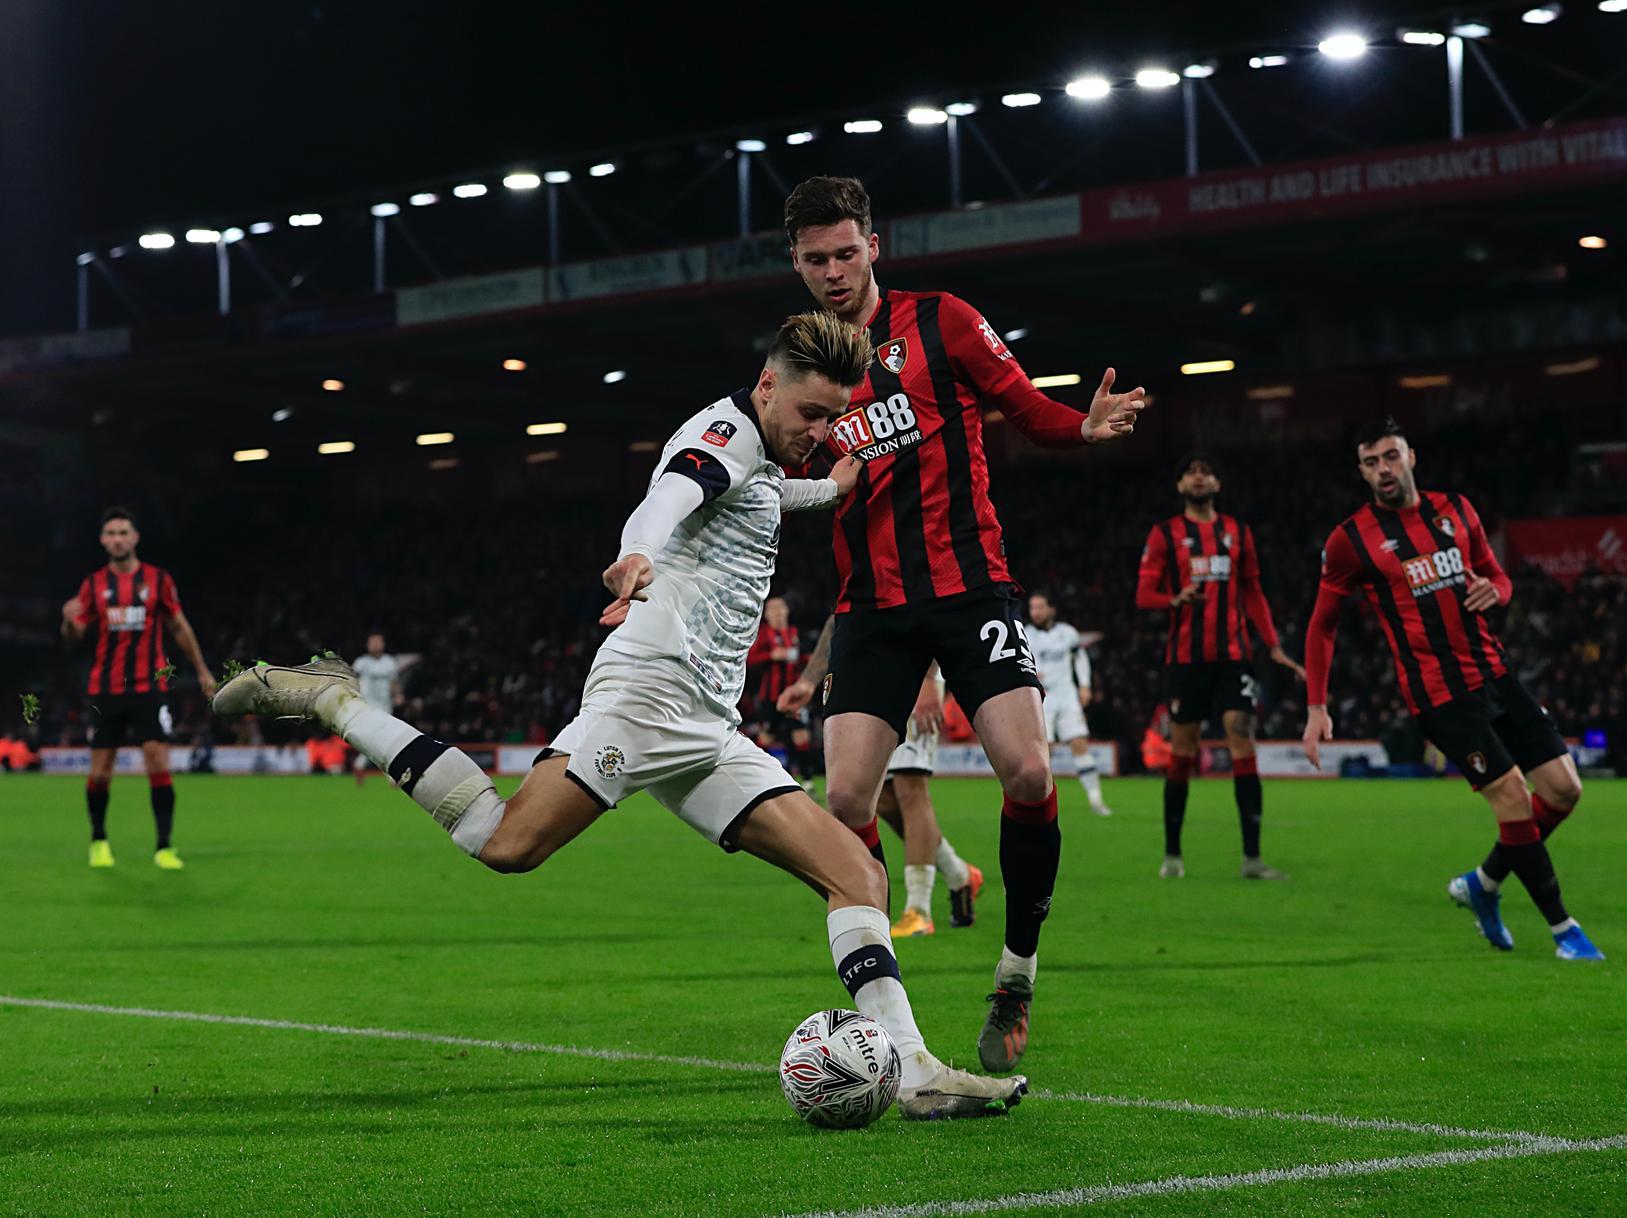 Despite the one-on-one miss, he gave absolutely everything on the night as the lone striker. Just never stopped running to try and ensure the Cherries defence had something to think about and his own team-mate an out ball.